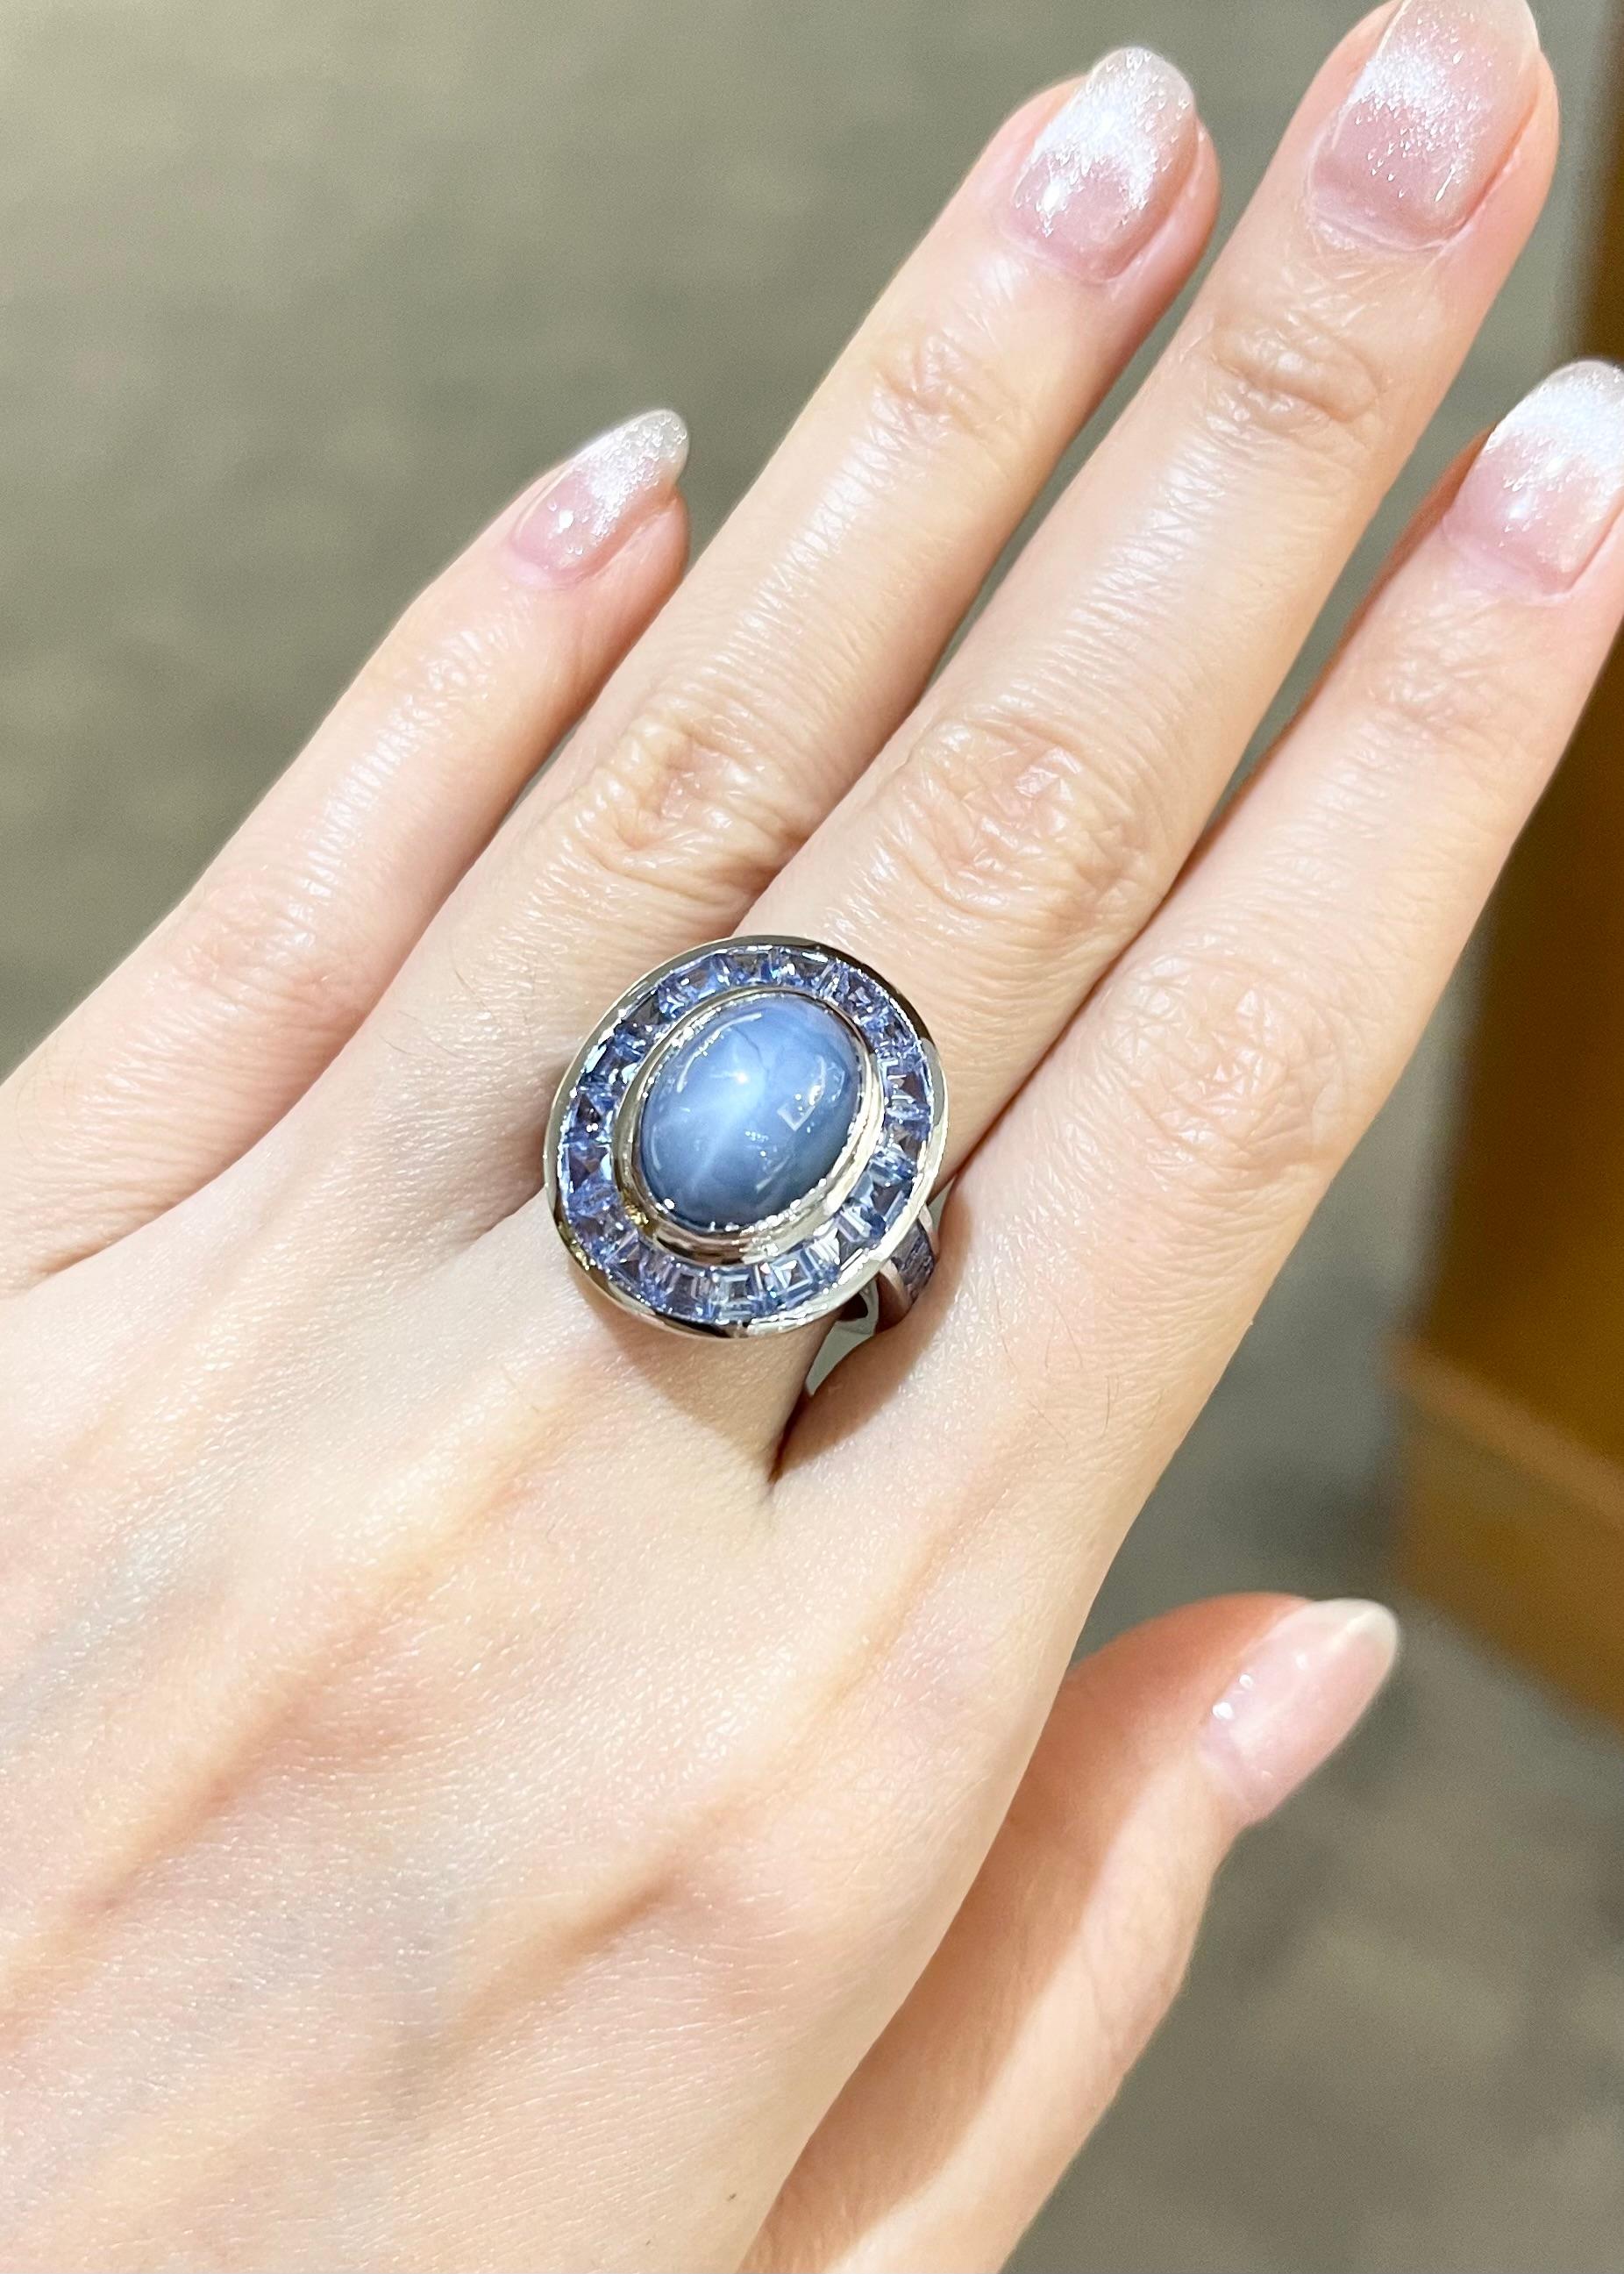 Blue Star Sapphire 9.03 carats with Blue Sapphire 3.50 carat Ring set in 18K White Gold Settings

Width:  1.8 cm 
Length: 2.1 cm
Ring Size: 53
Total Weight: 13.05 grams

